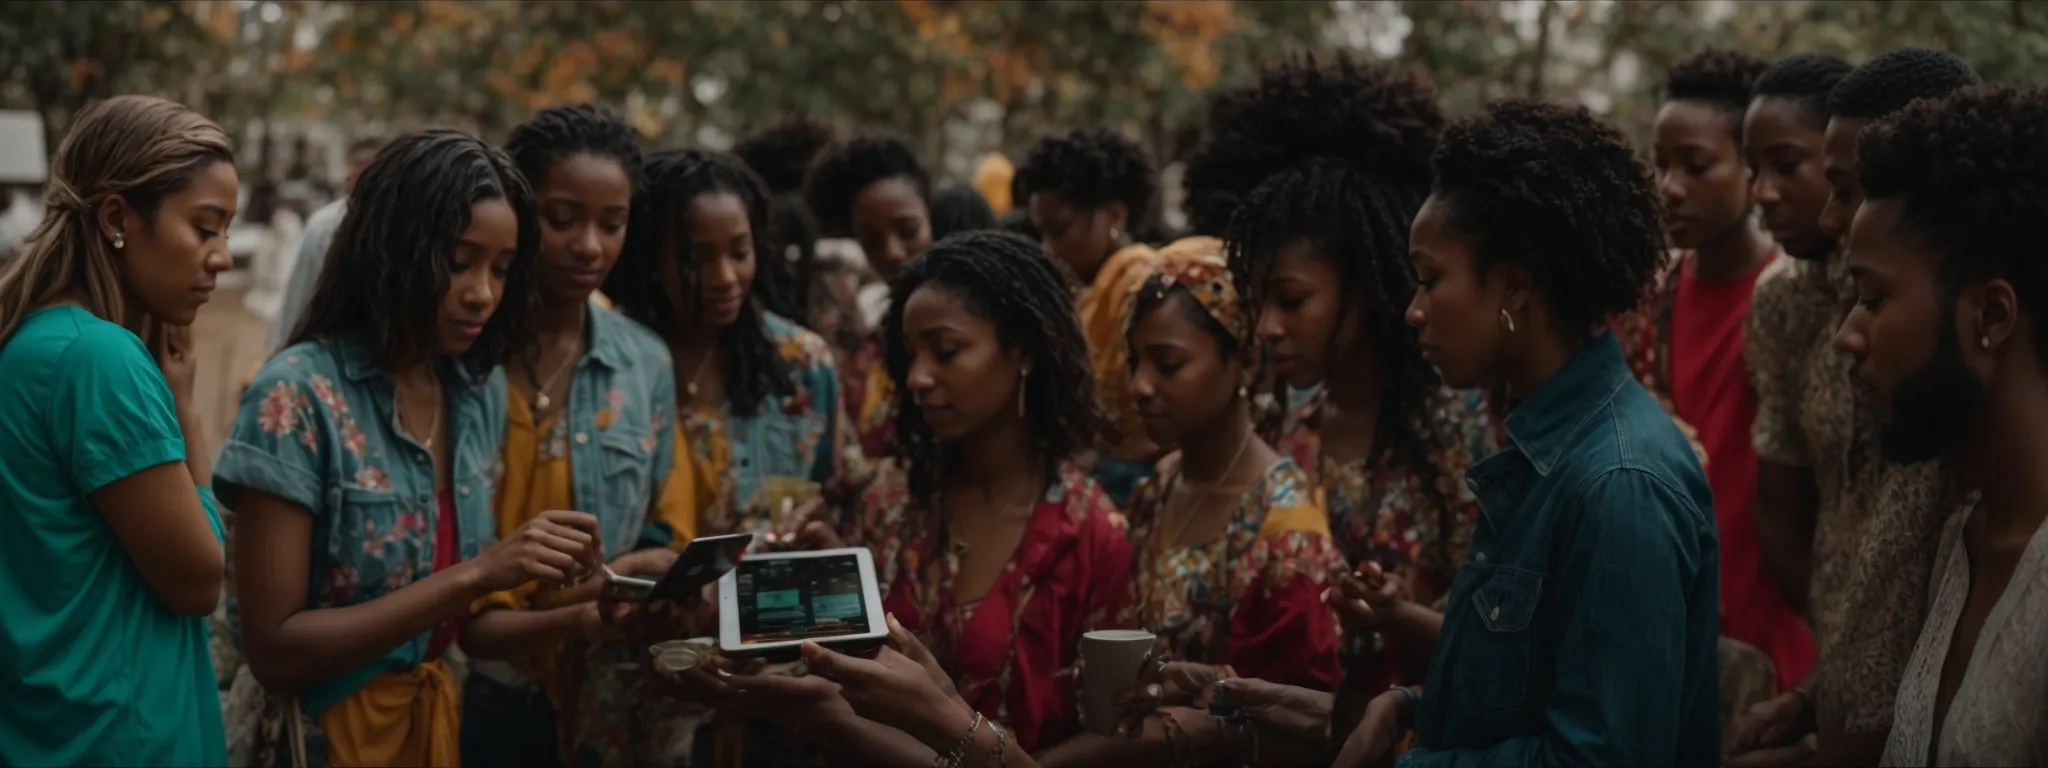 a group of diverse people gathered around a digital tablet, engaging with a colorful and vibrant pinterest interface.